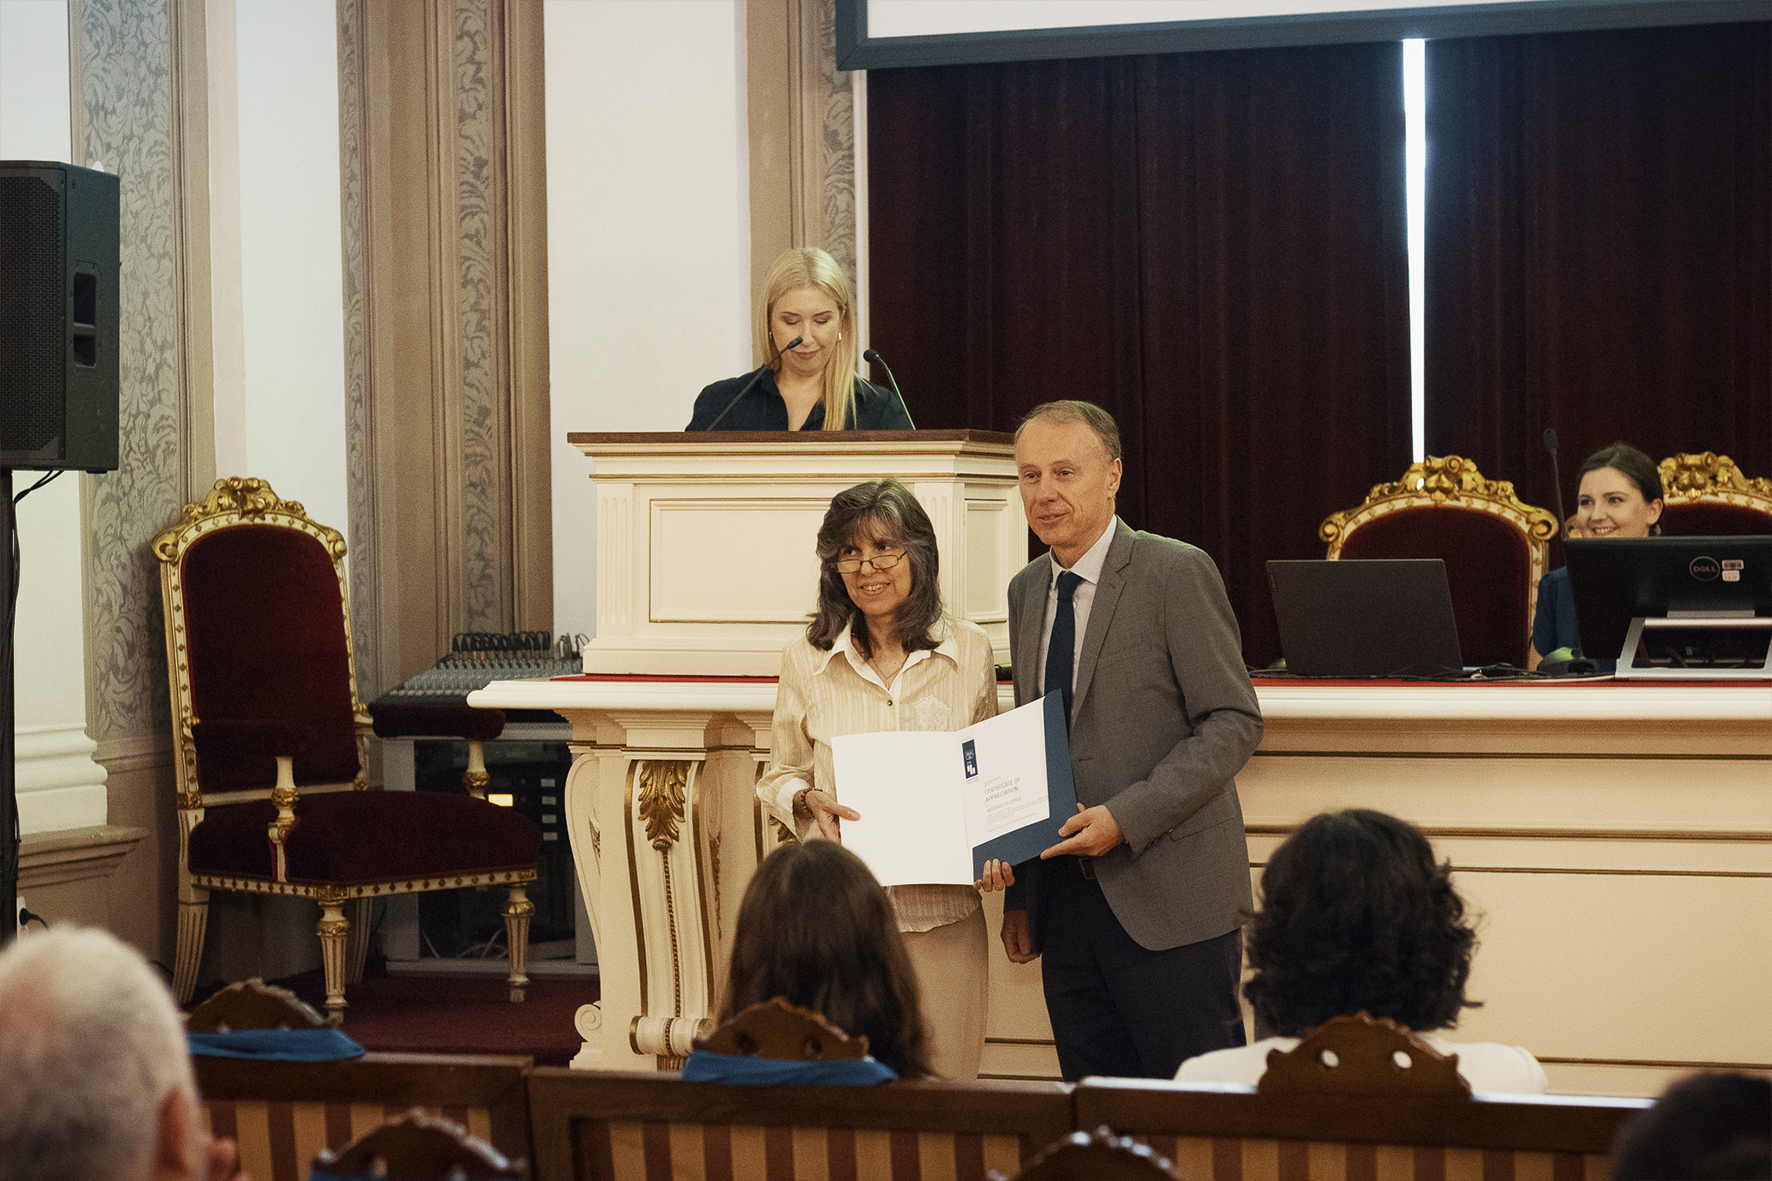 Prof. Dr. Vladan Djokic handing out the Certificate of Appreciation to the University of Cyprus,  received by Prof. Dr. Maria Philokyprou, Scientific Coordinator of HERSUS Project for University of Cyprus.© Marko Miladinović